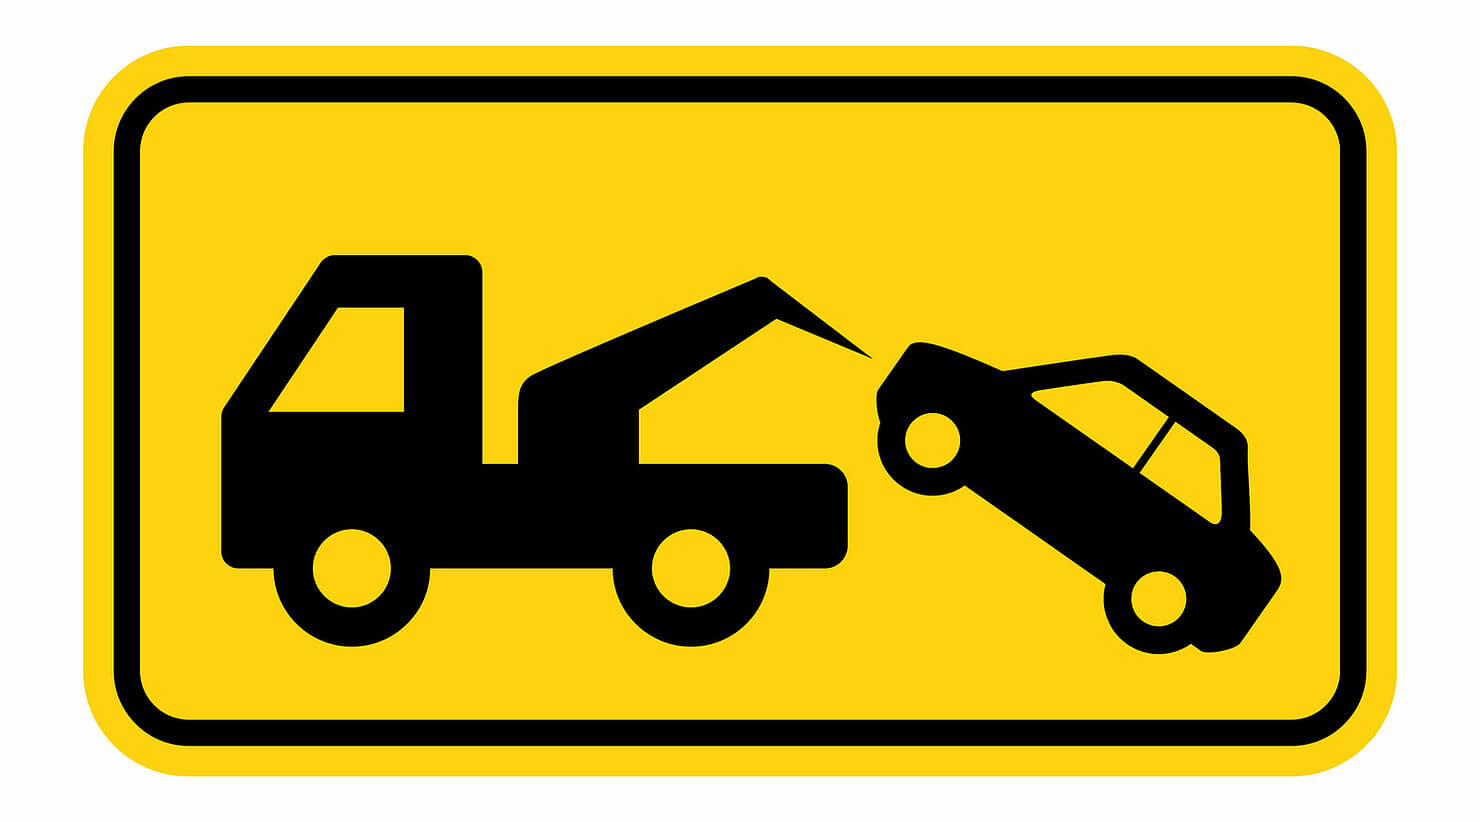 Road Assistance